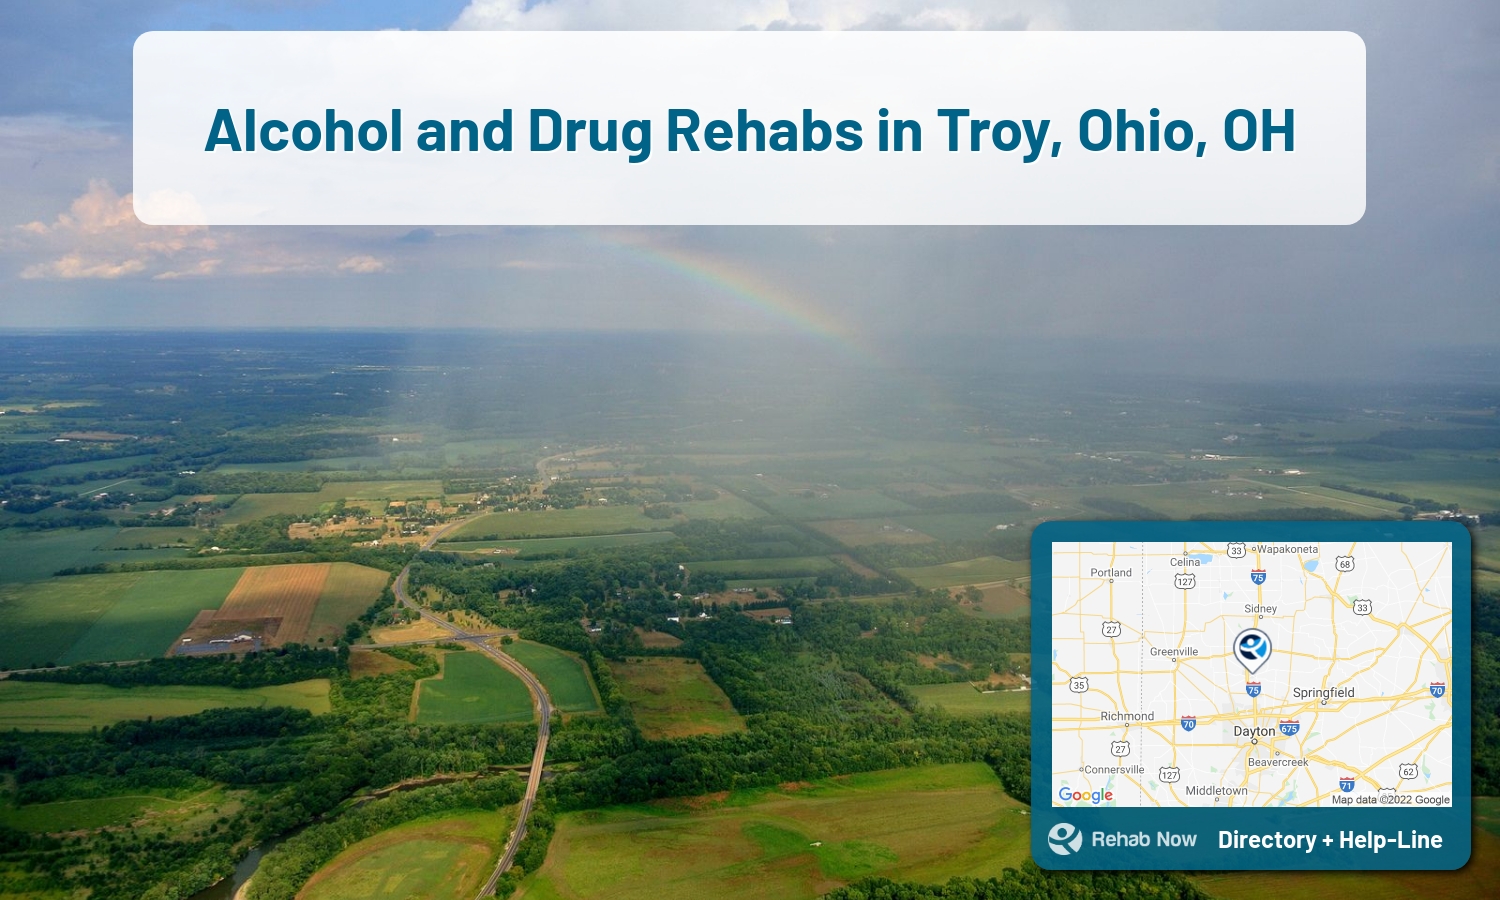 Find drug rehab and alcohol treatment services in Troy. Our experts help you find a center in Troy, Ohio